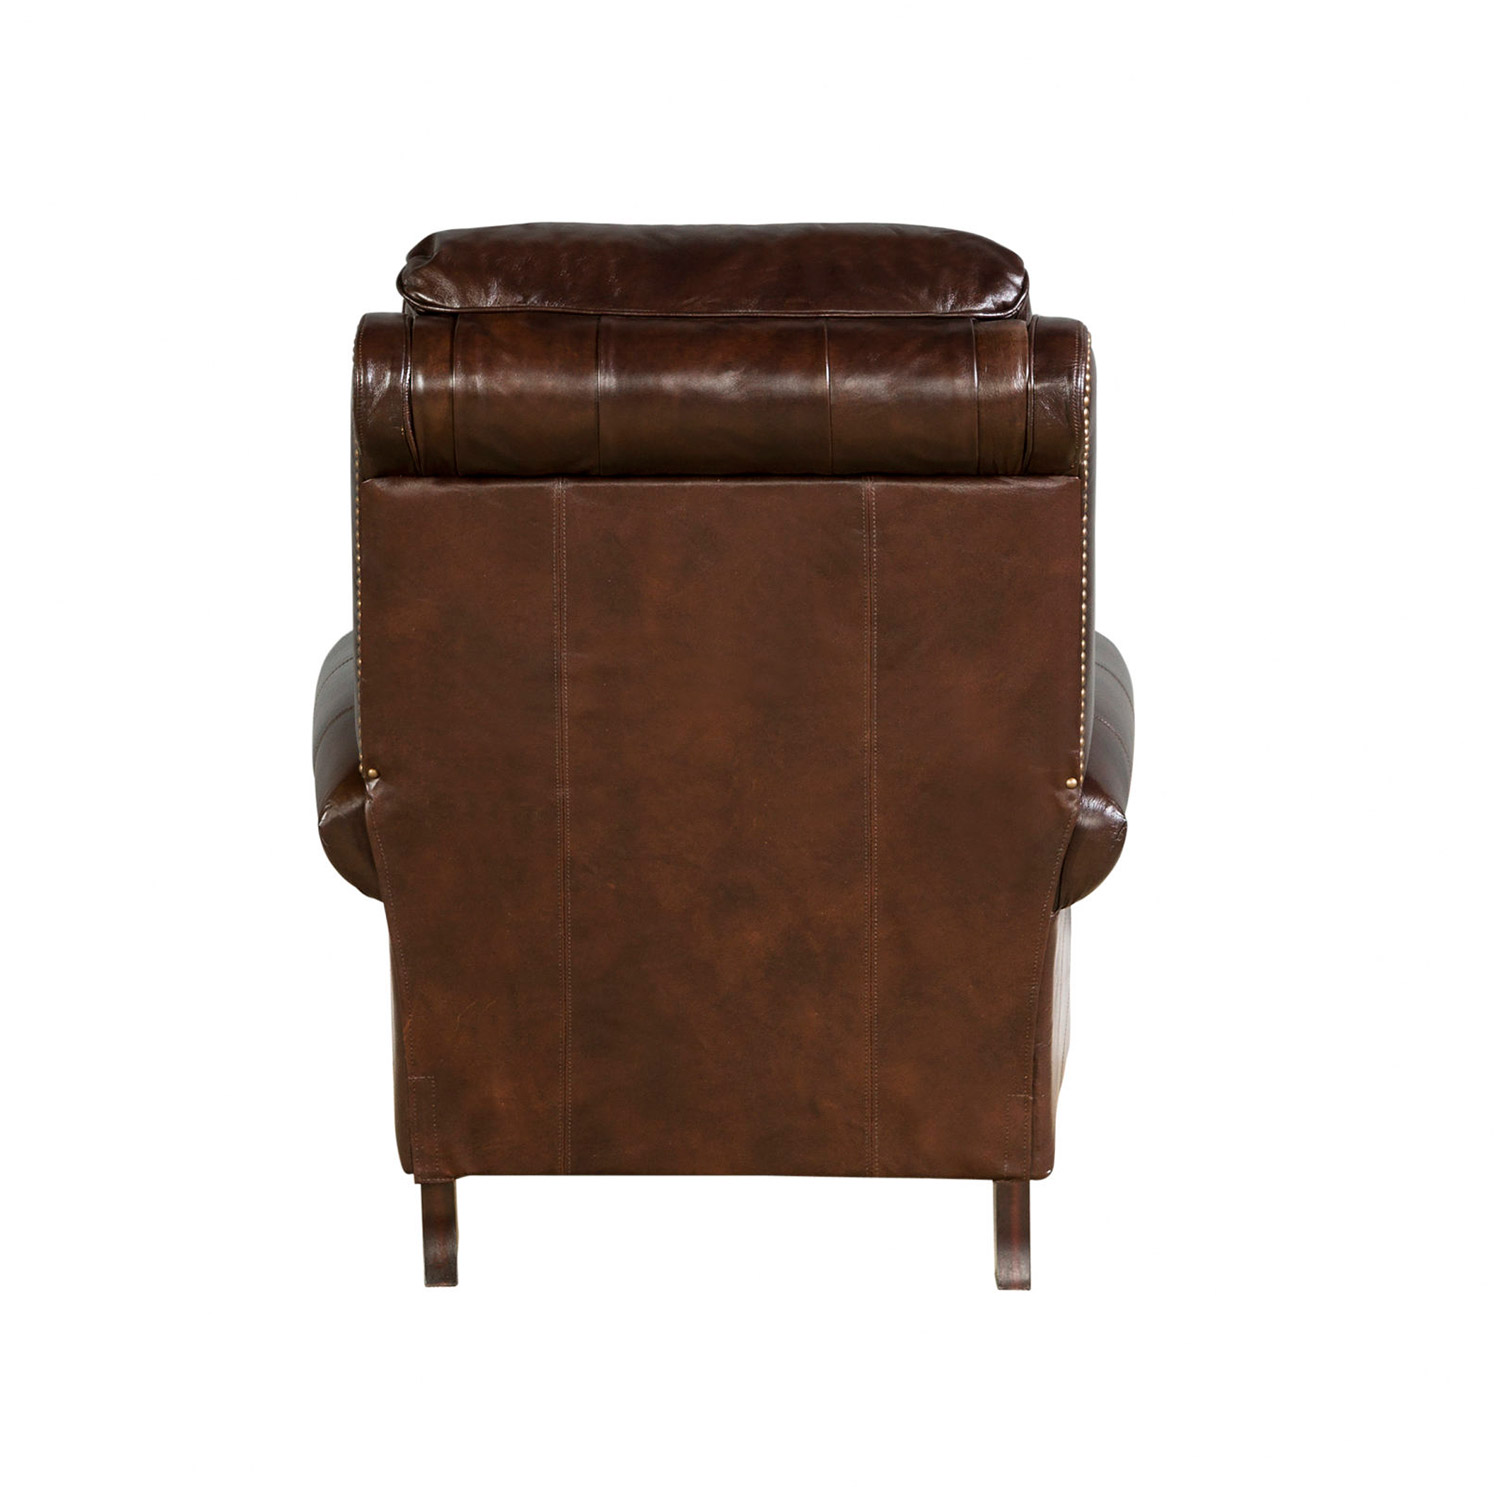 Barcalounger Churchill Recliner Chair - Double Fudge/All Leather